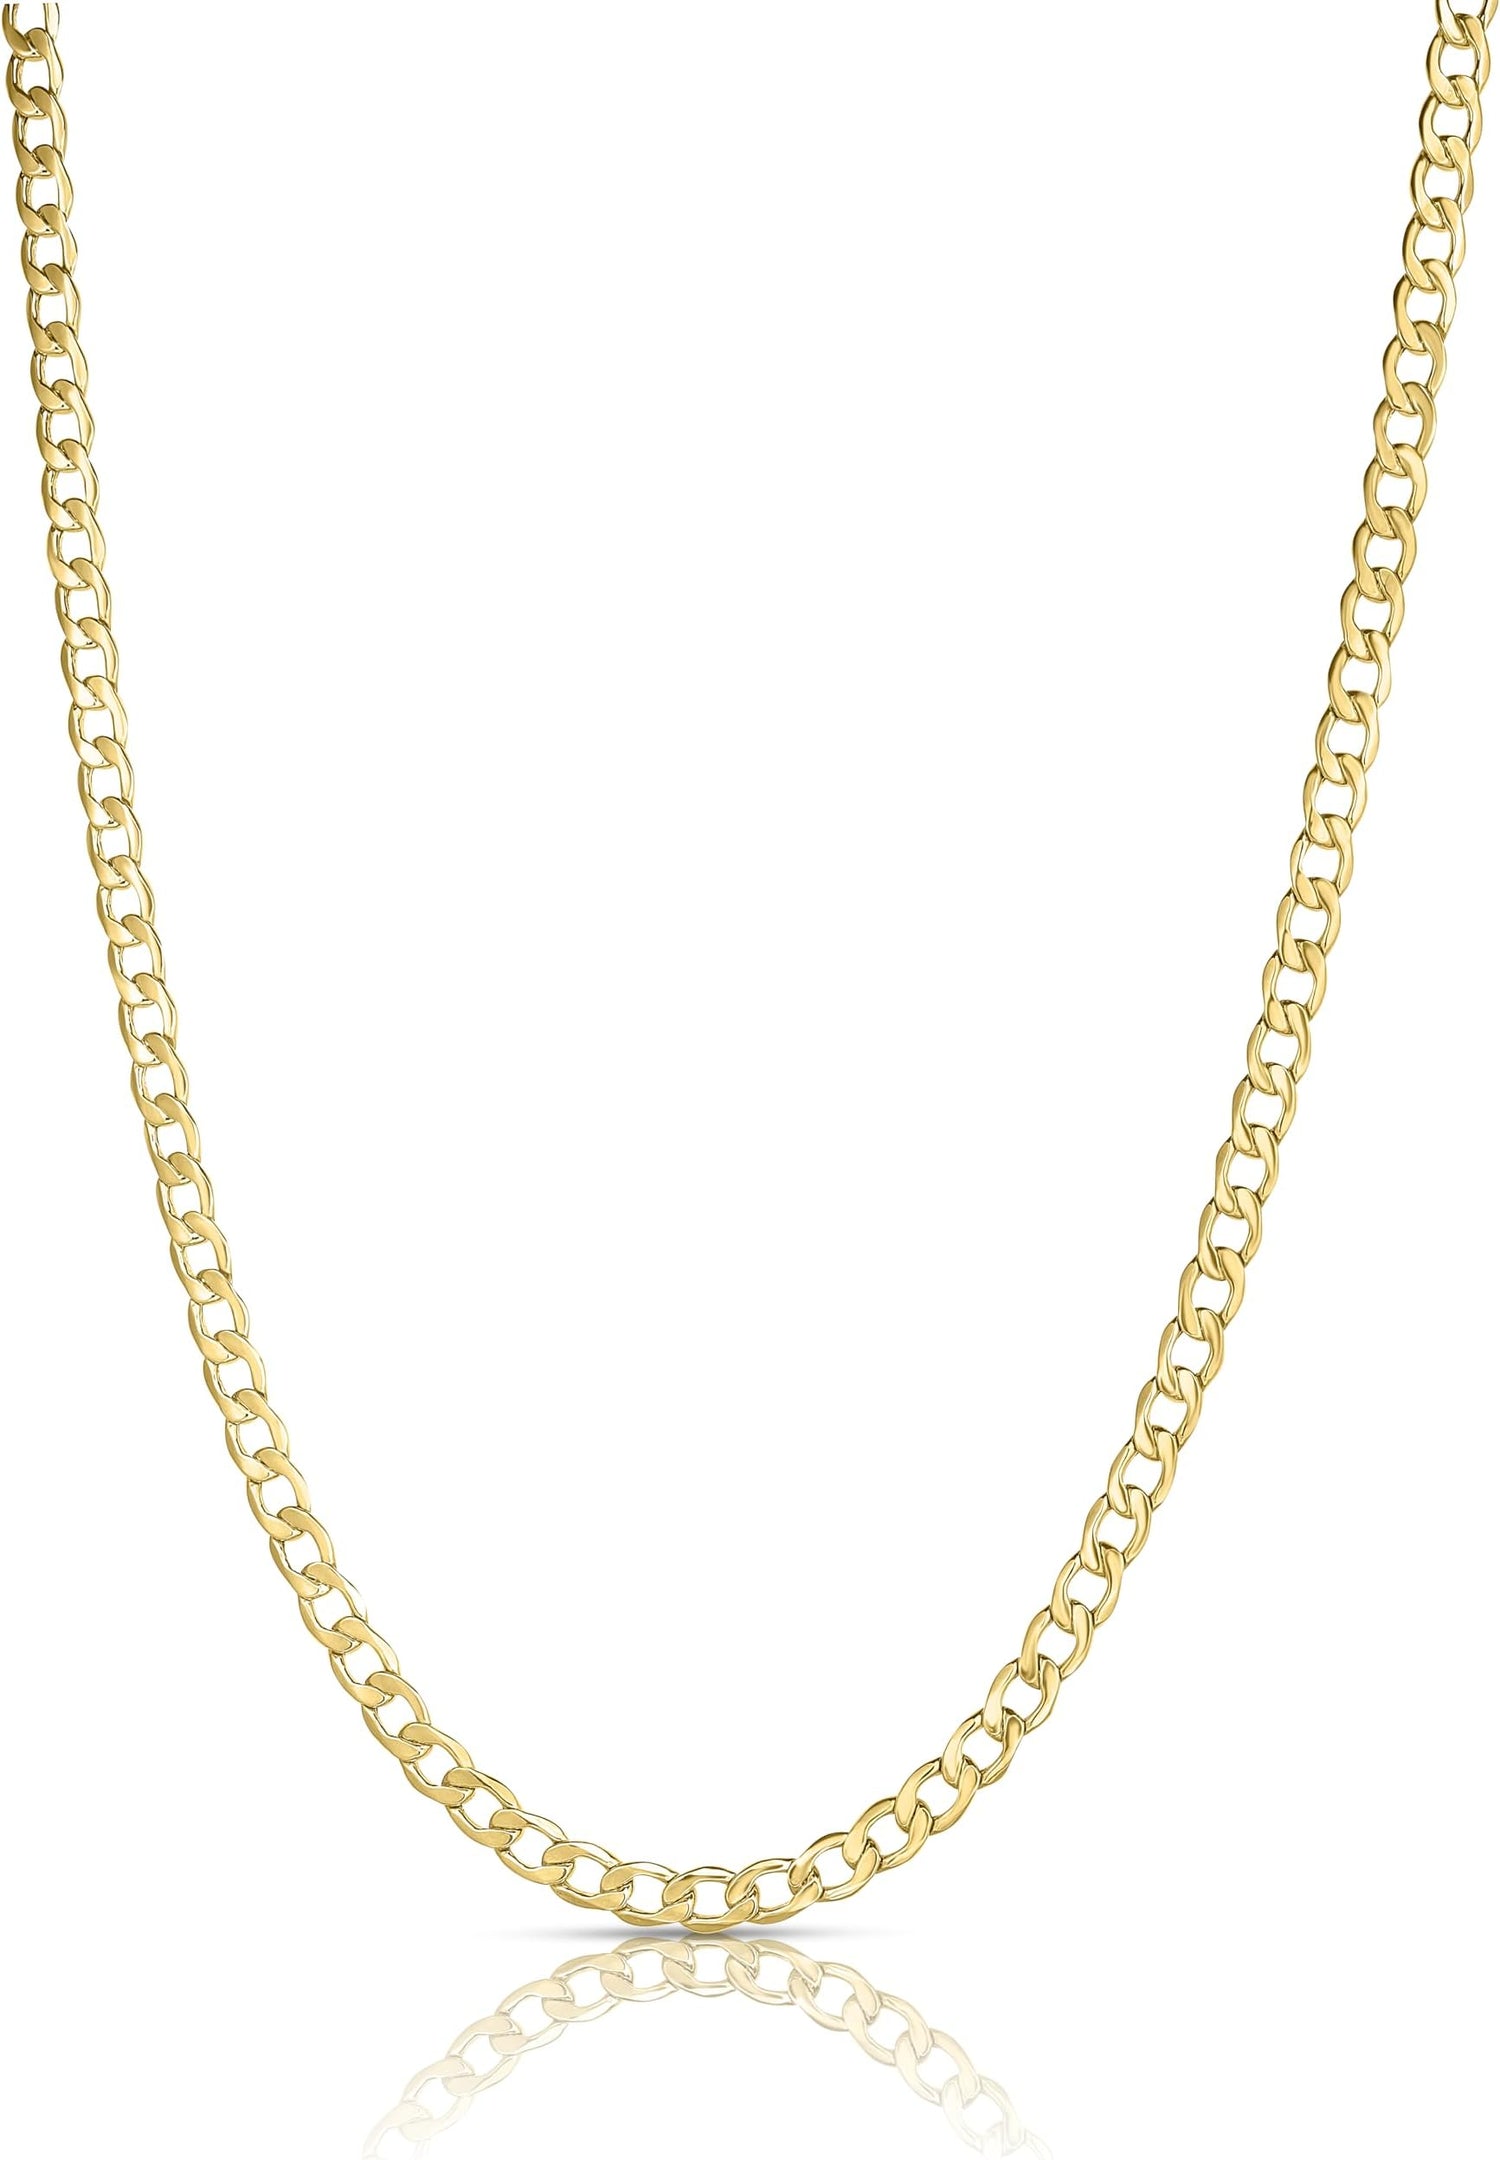 10k Yellow Gold 5.3mm Hollow Cuban Curb Link Chain Necklace